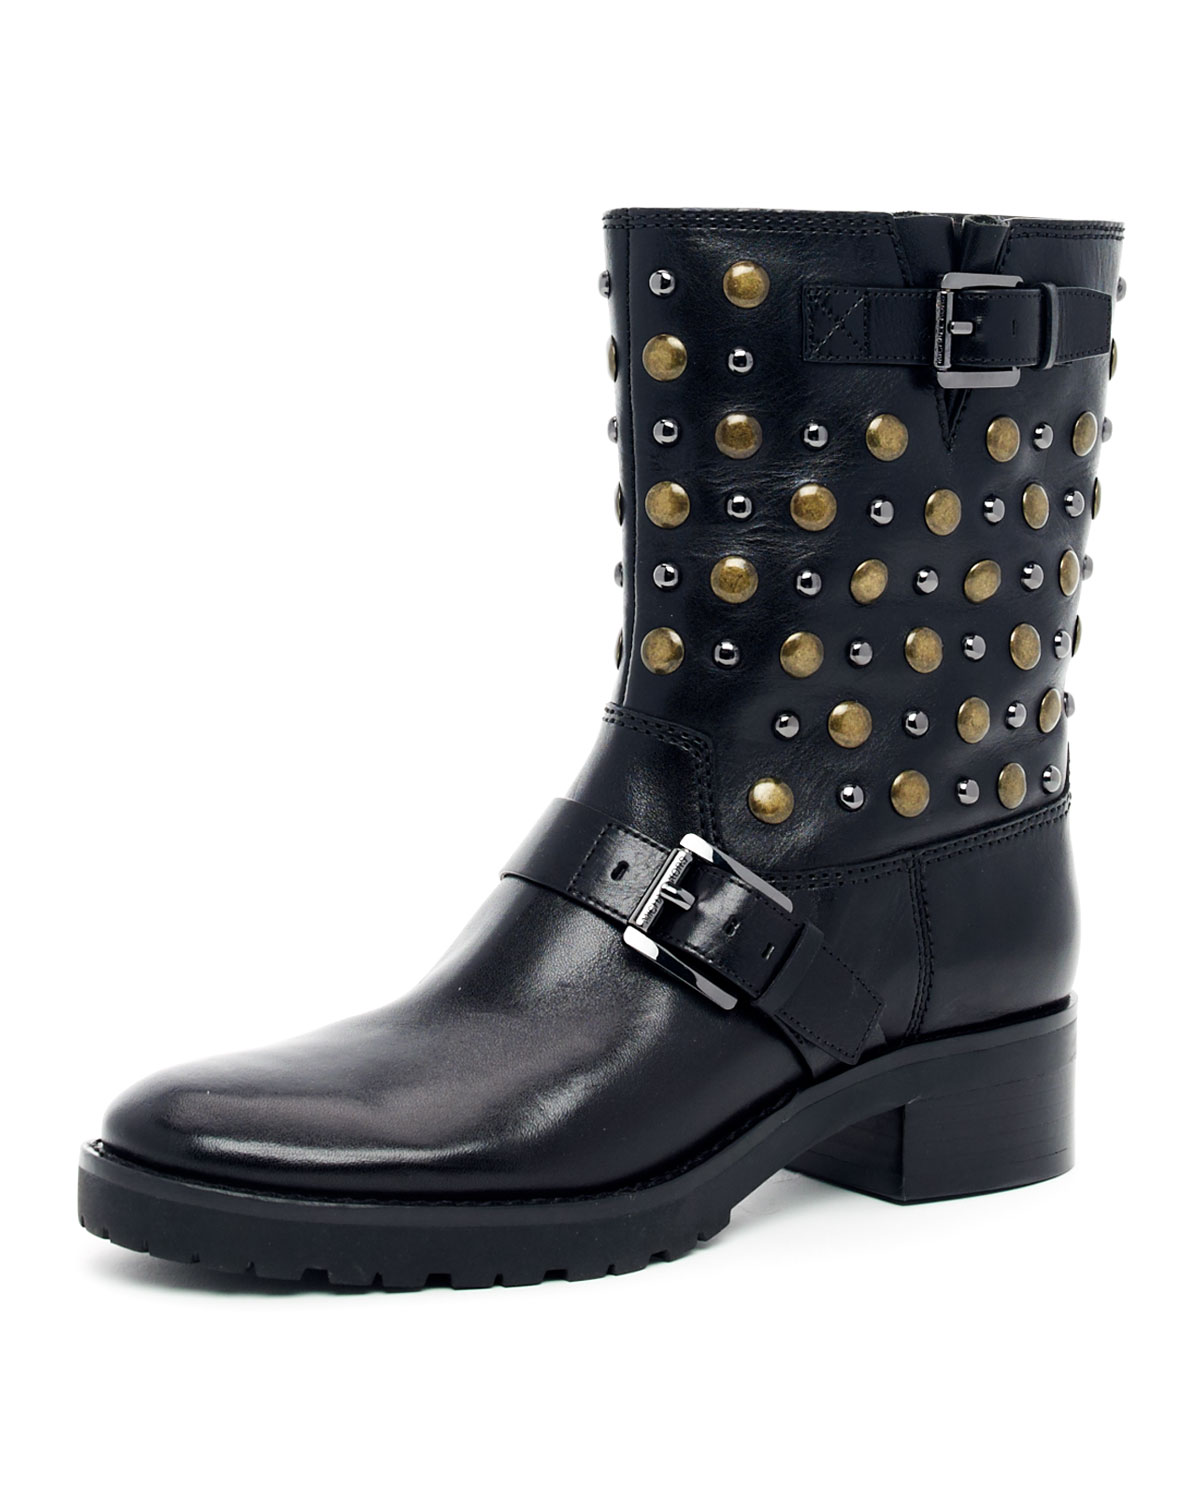 Lyst - Michael Kors Studded Buckle Boot in Black